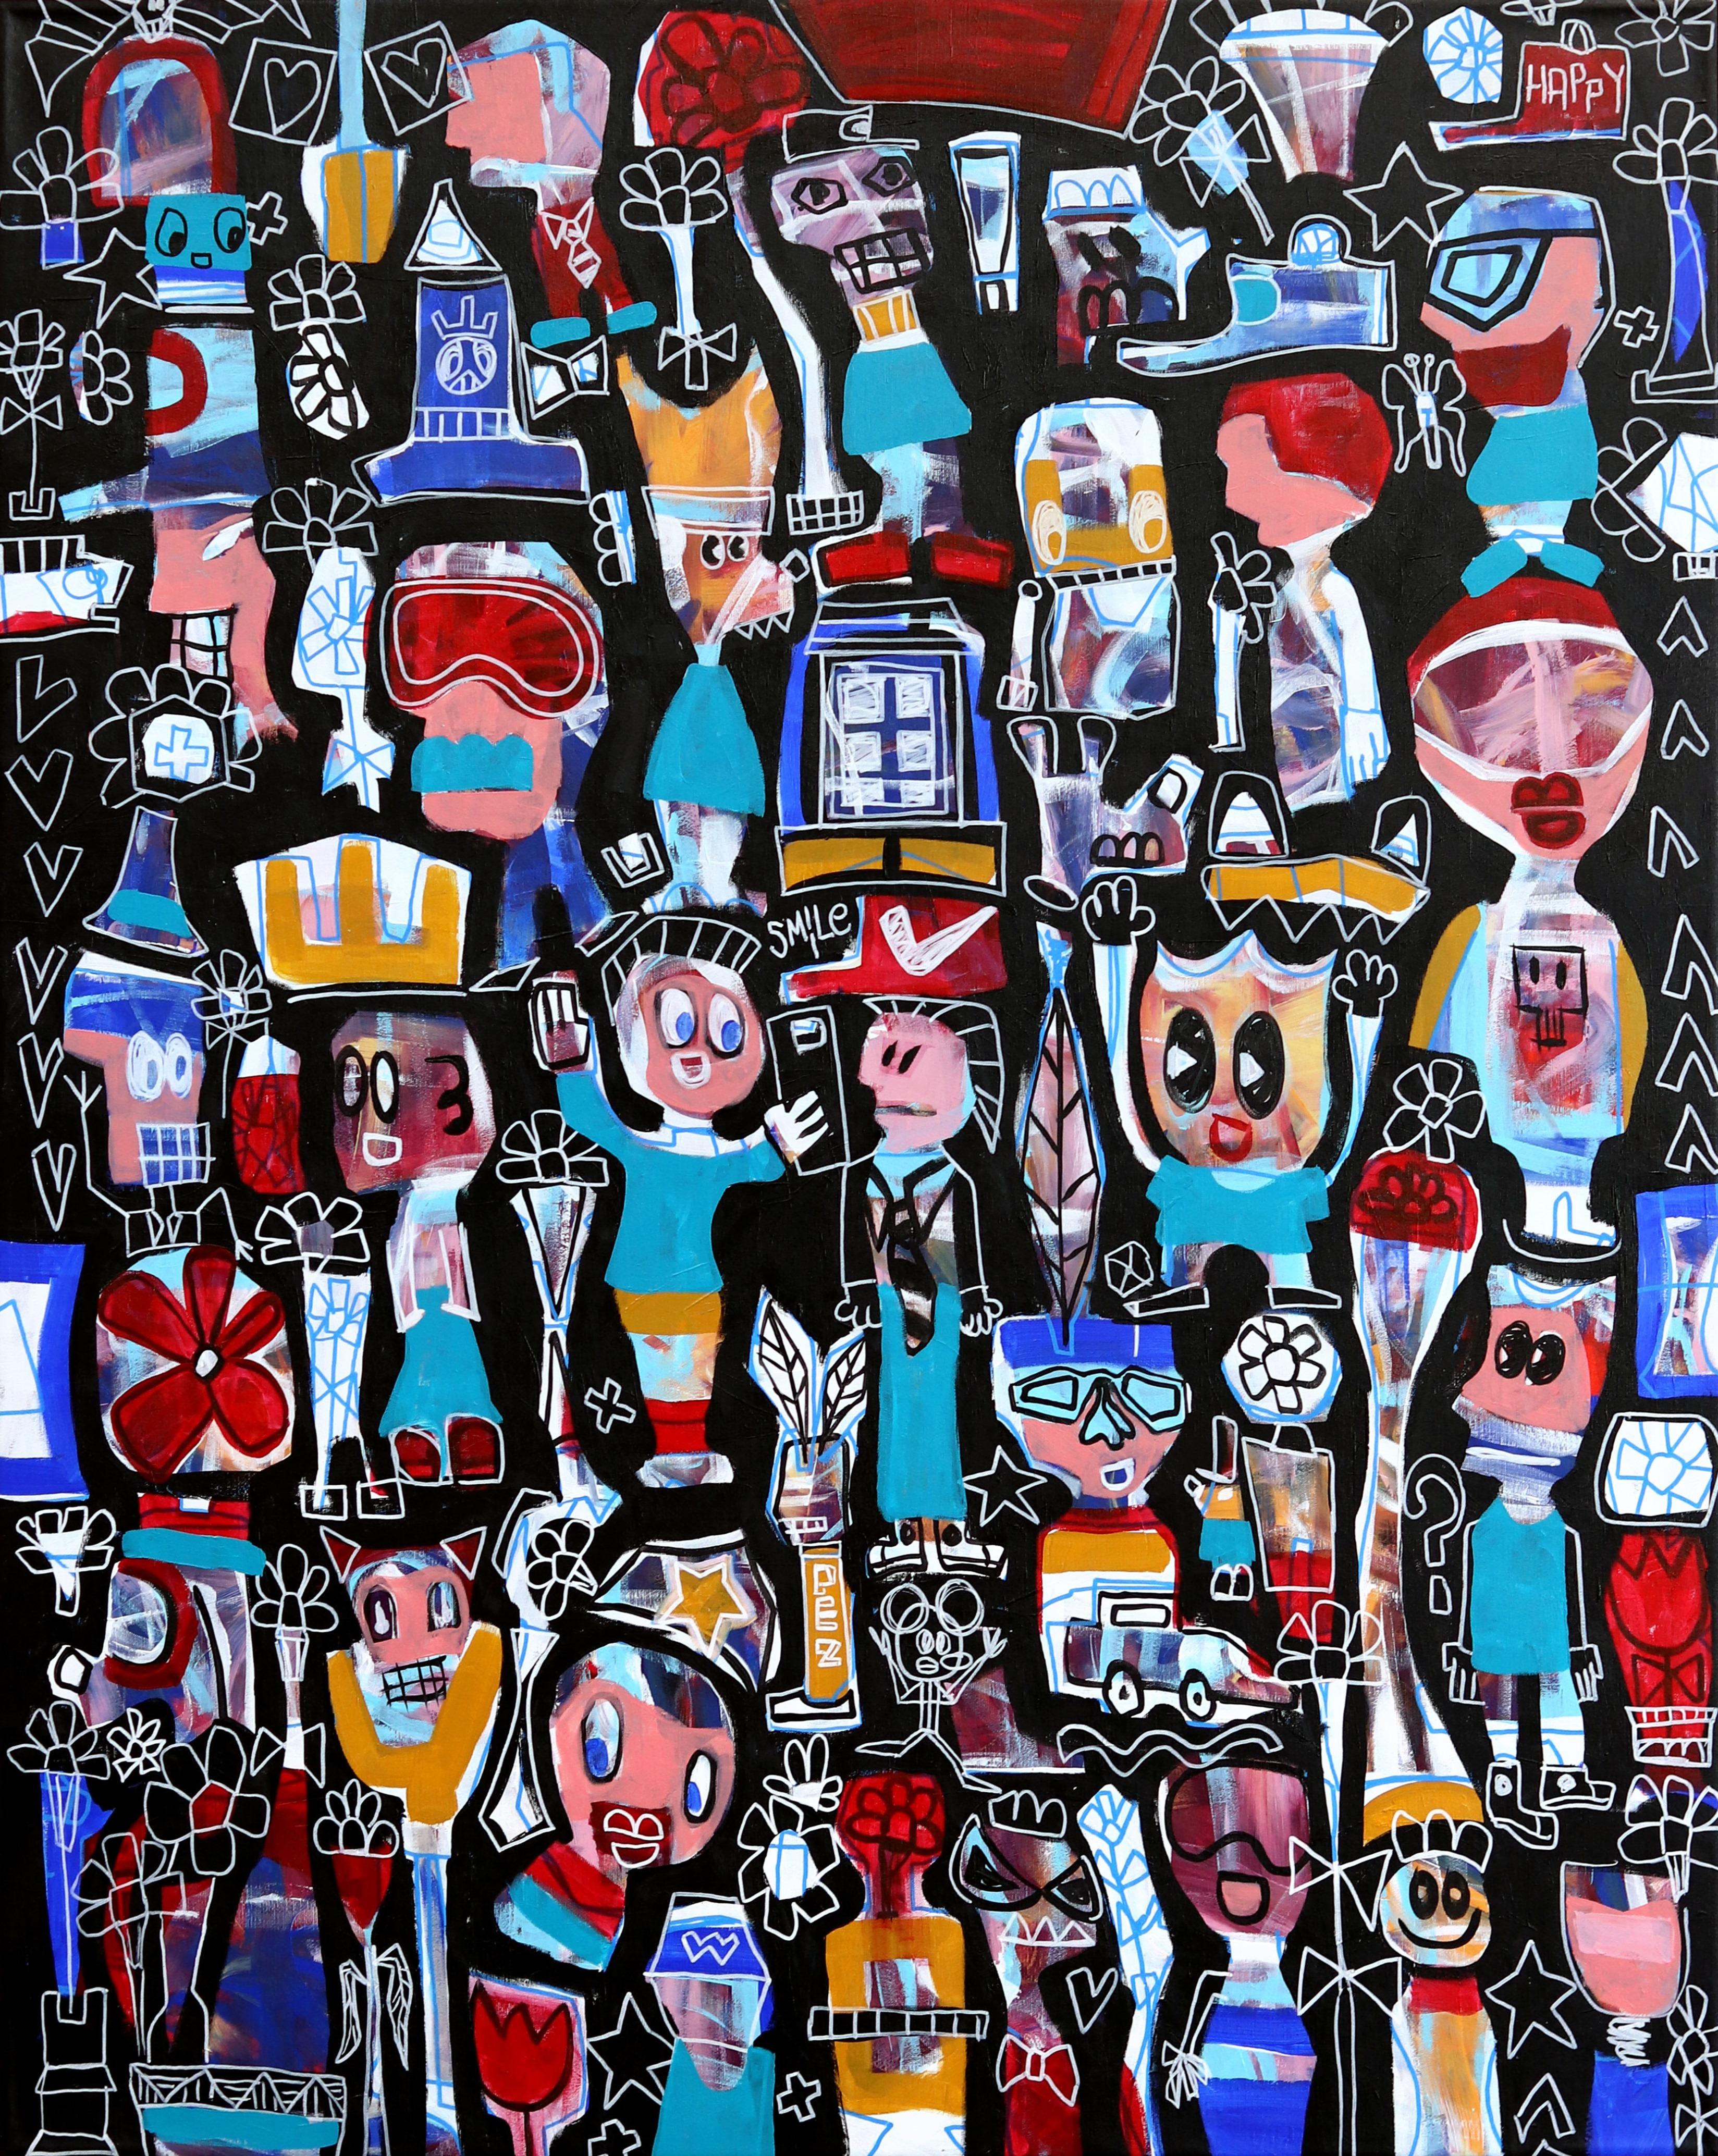 Hands Up - Friends and Family Neo-Expressionist Large Painting on Canvas